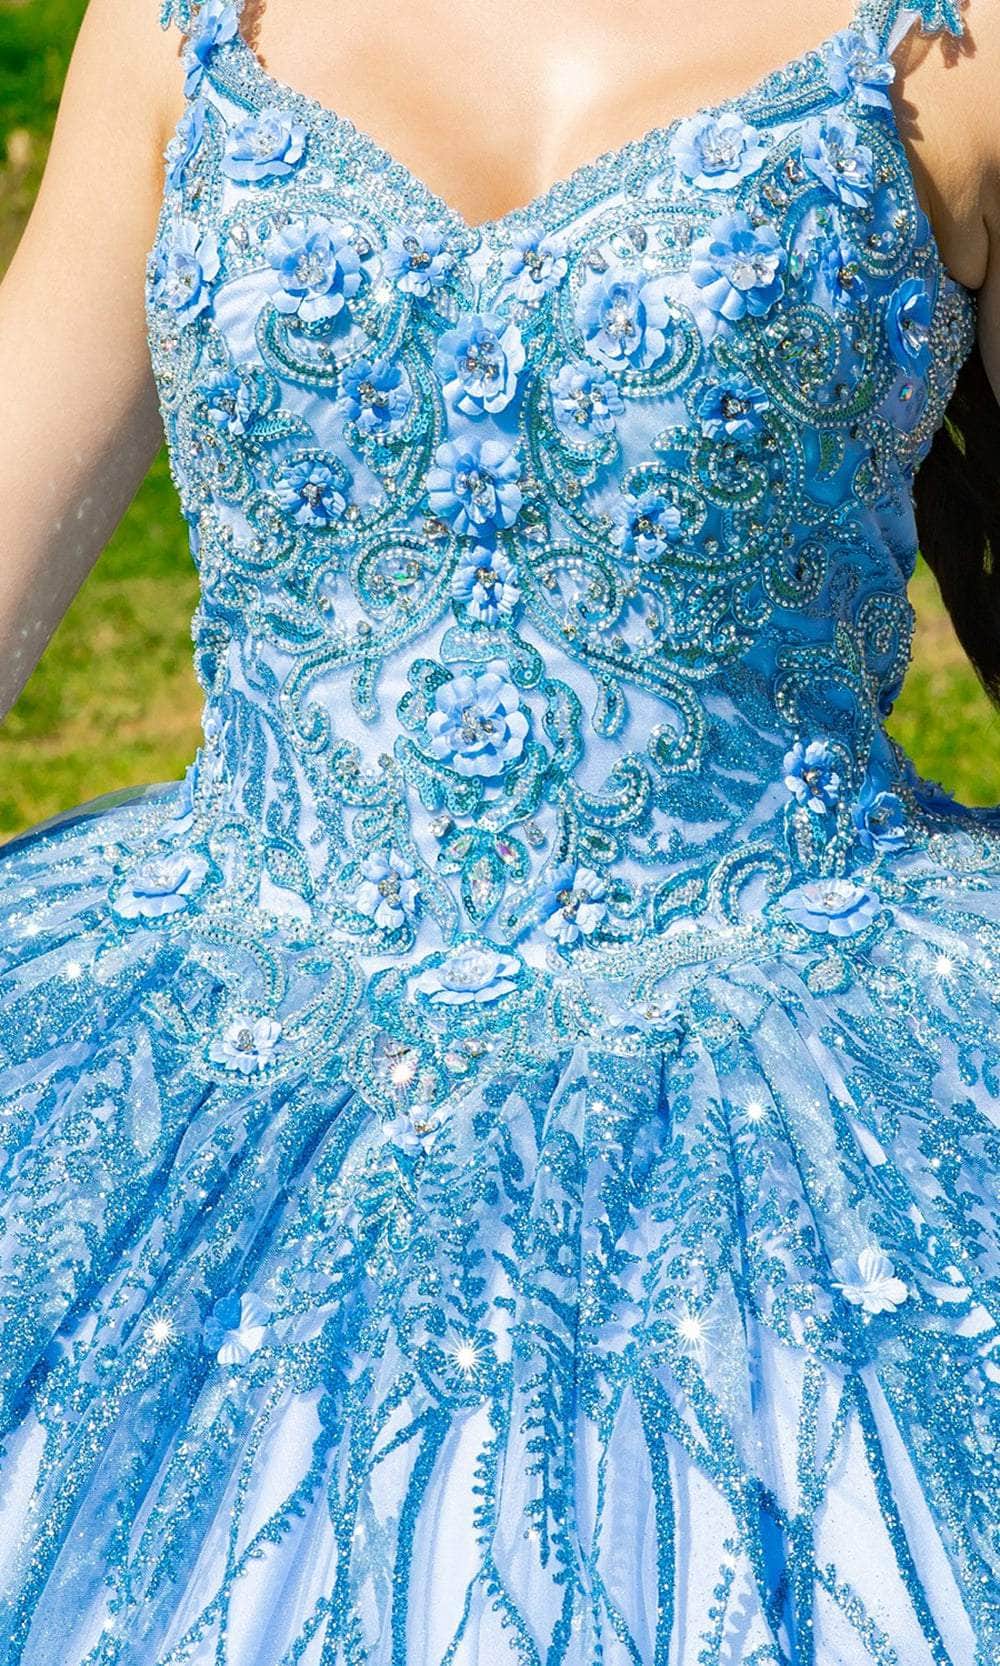 Cinderella Couture 8110J - Embroidered Lace-Up Back Ballgown Ball Gowns